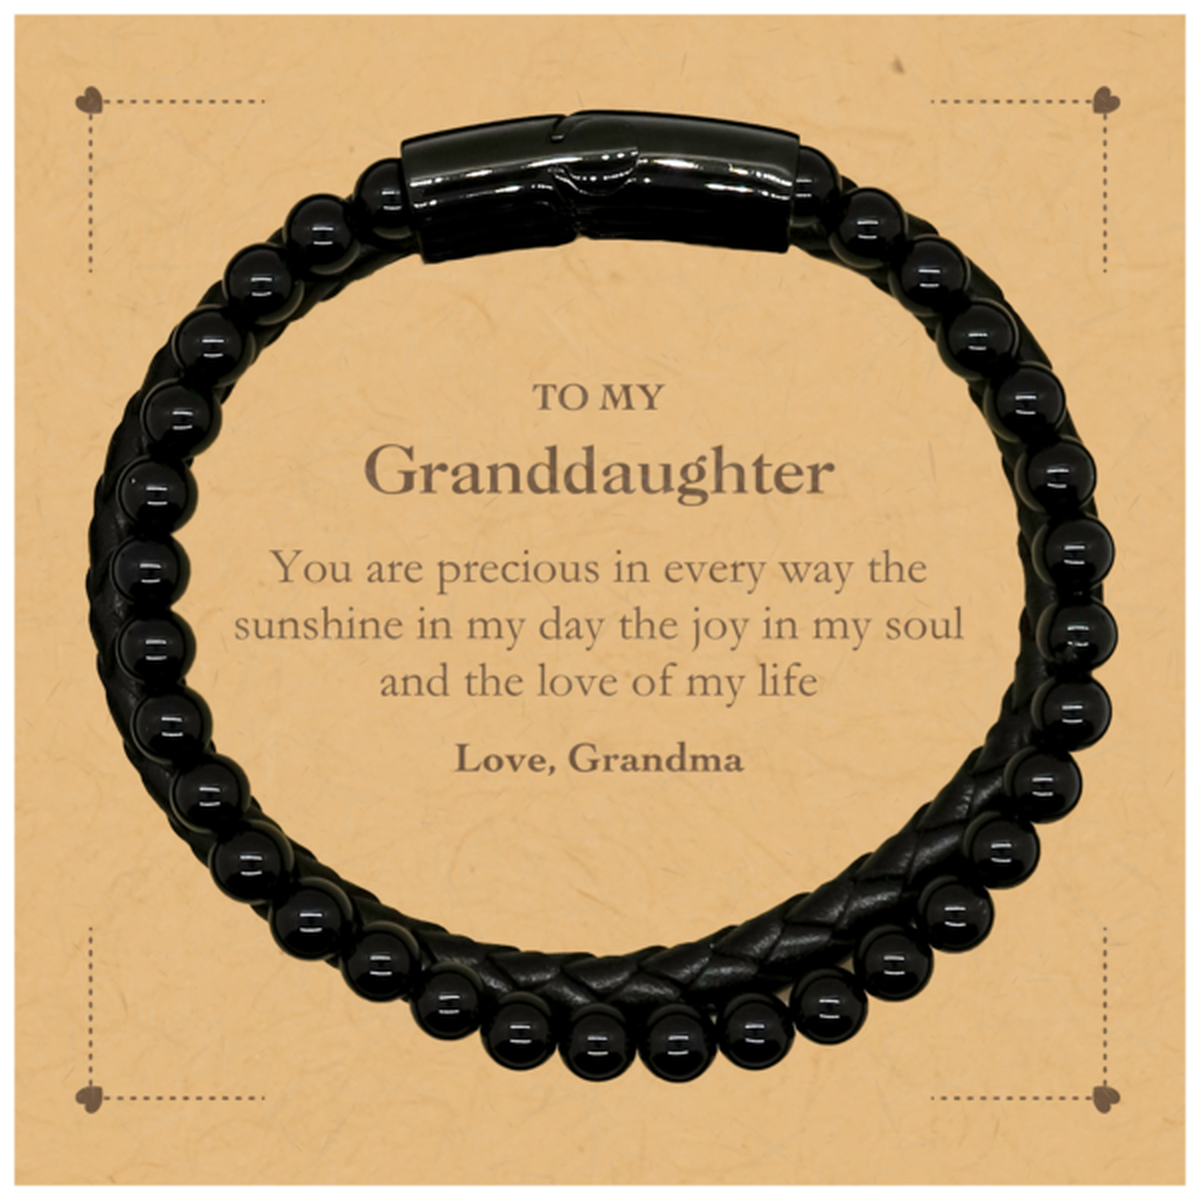 Graduation Gifts for Granddaughter Stone Leather Bracelets Present from Grandma, Christmas Granddaughter Birthday Gifts Granddaughter You are precious in every way the sunshine in my day. Love, Grandma